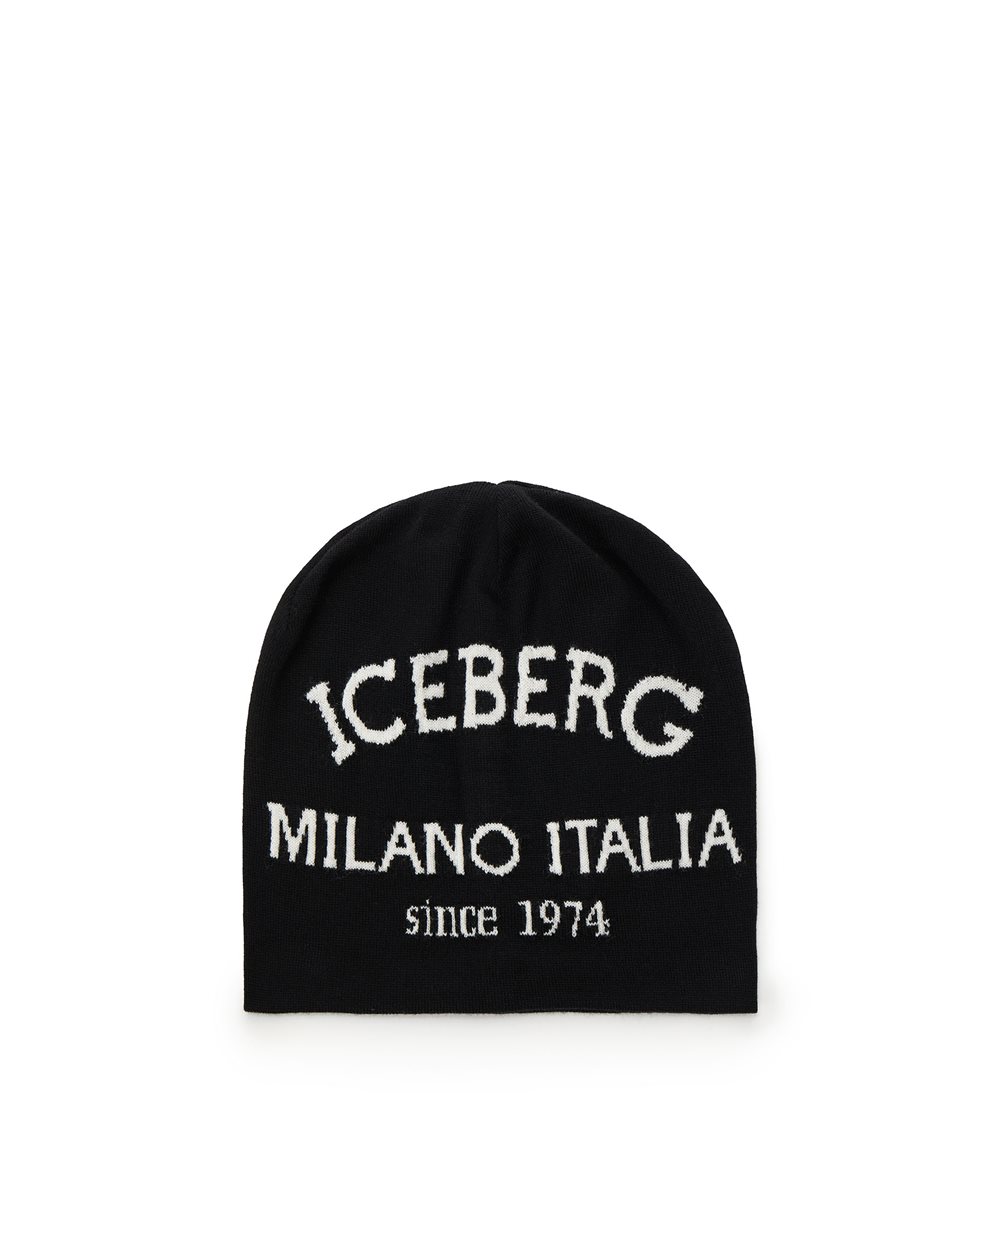 Wool beanie with logo -  ( SECONDO STEP DE ) PROMO SALDI UP TO 40% | Iceberg - Official Website